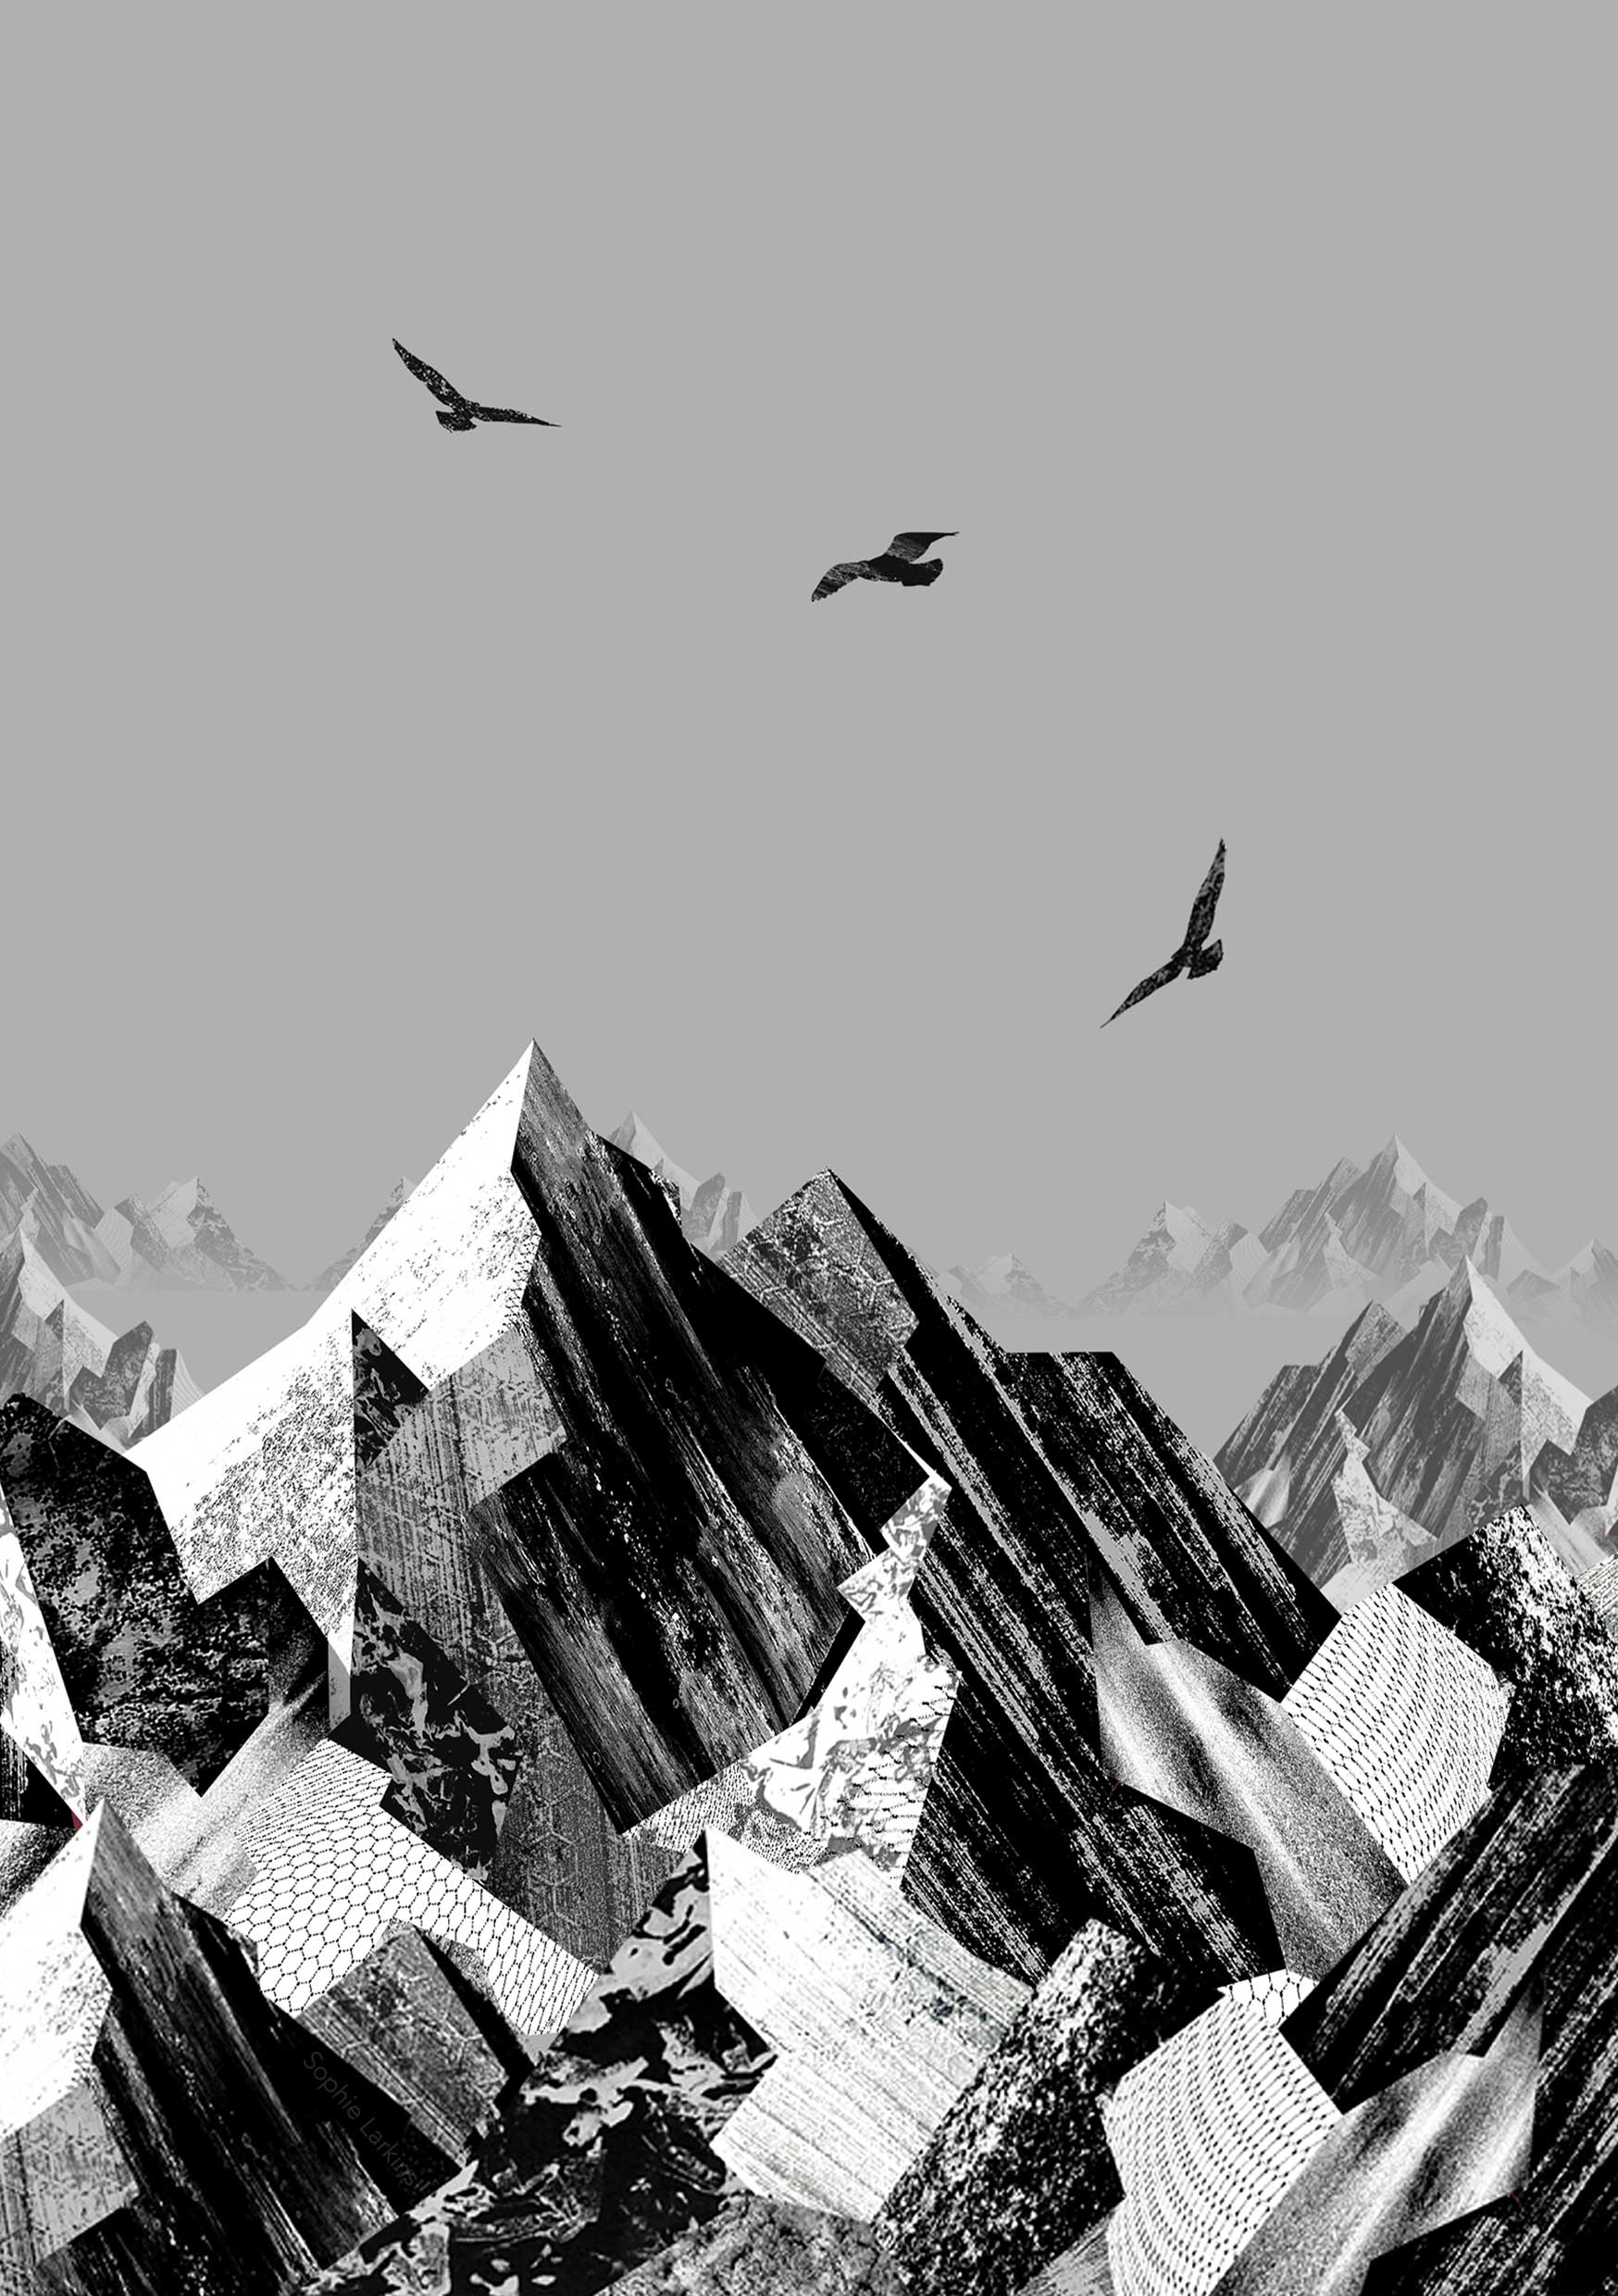 Mountains of detritus from the city forming jagged mountain peaks with eagles soaring around them in black and white and harsh grain and paint textures